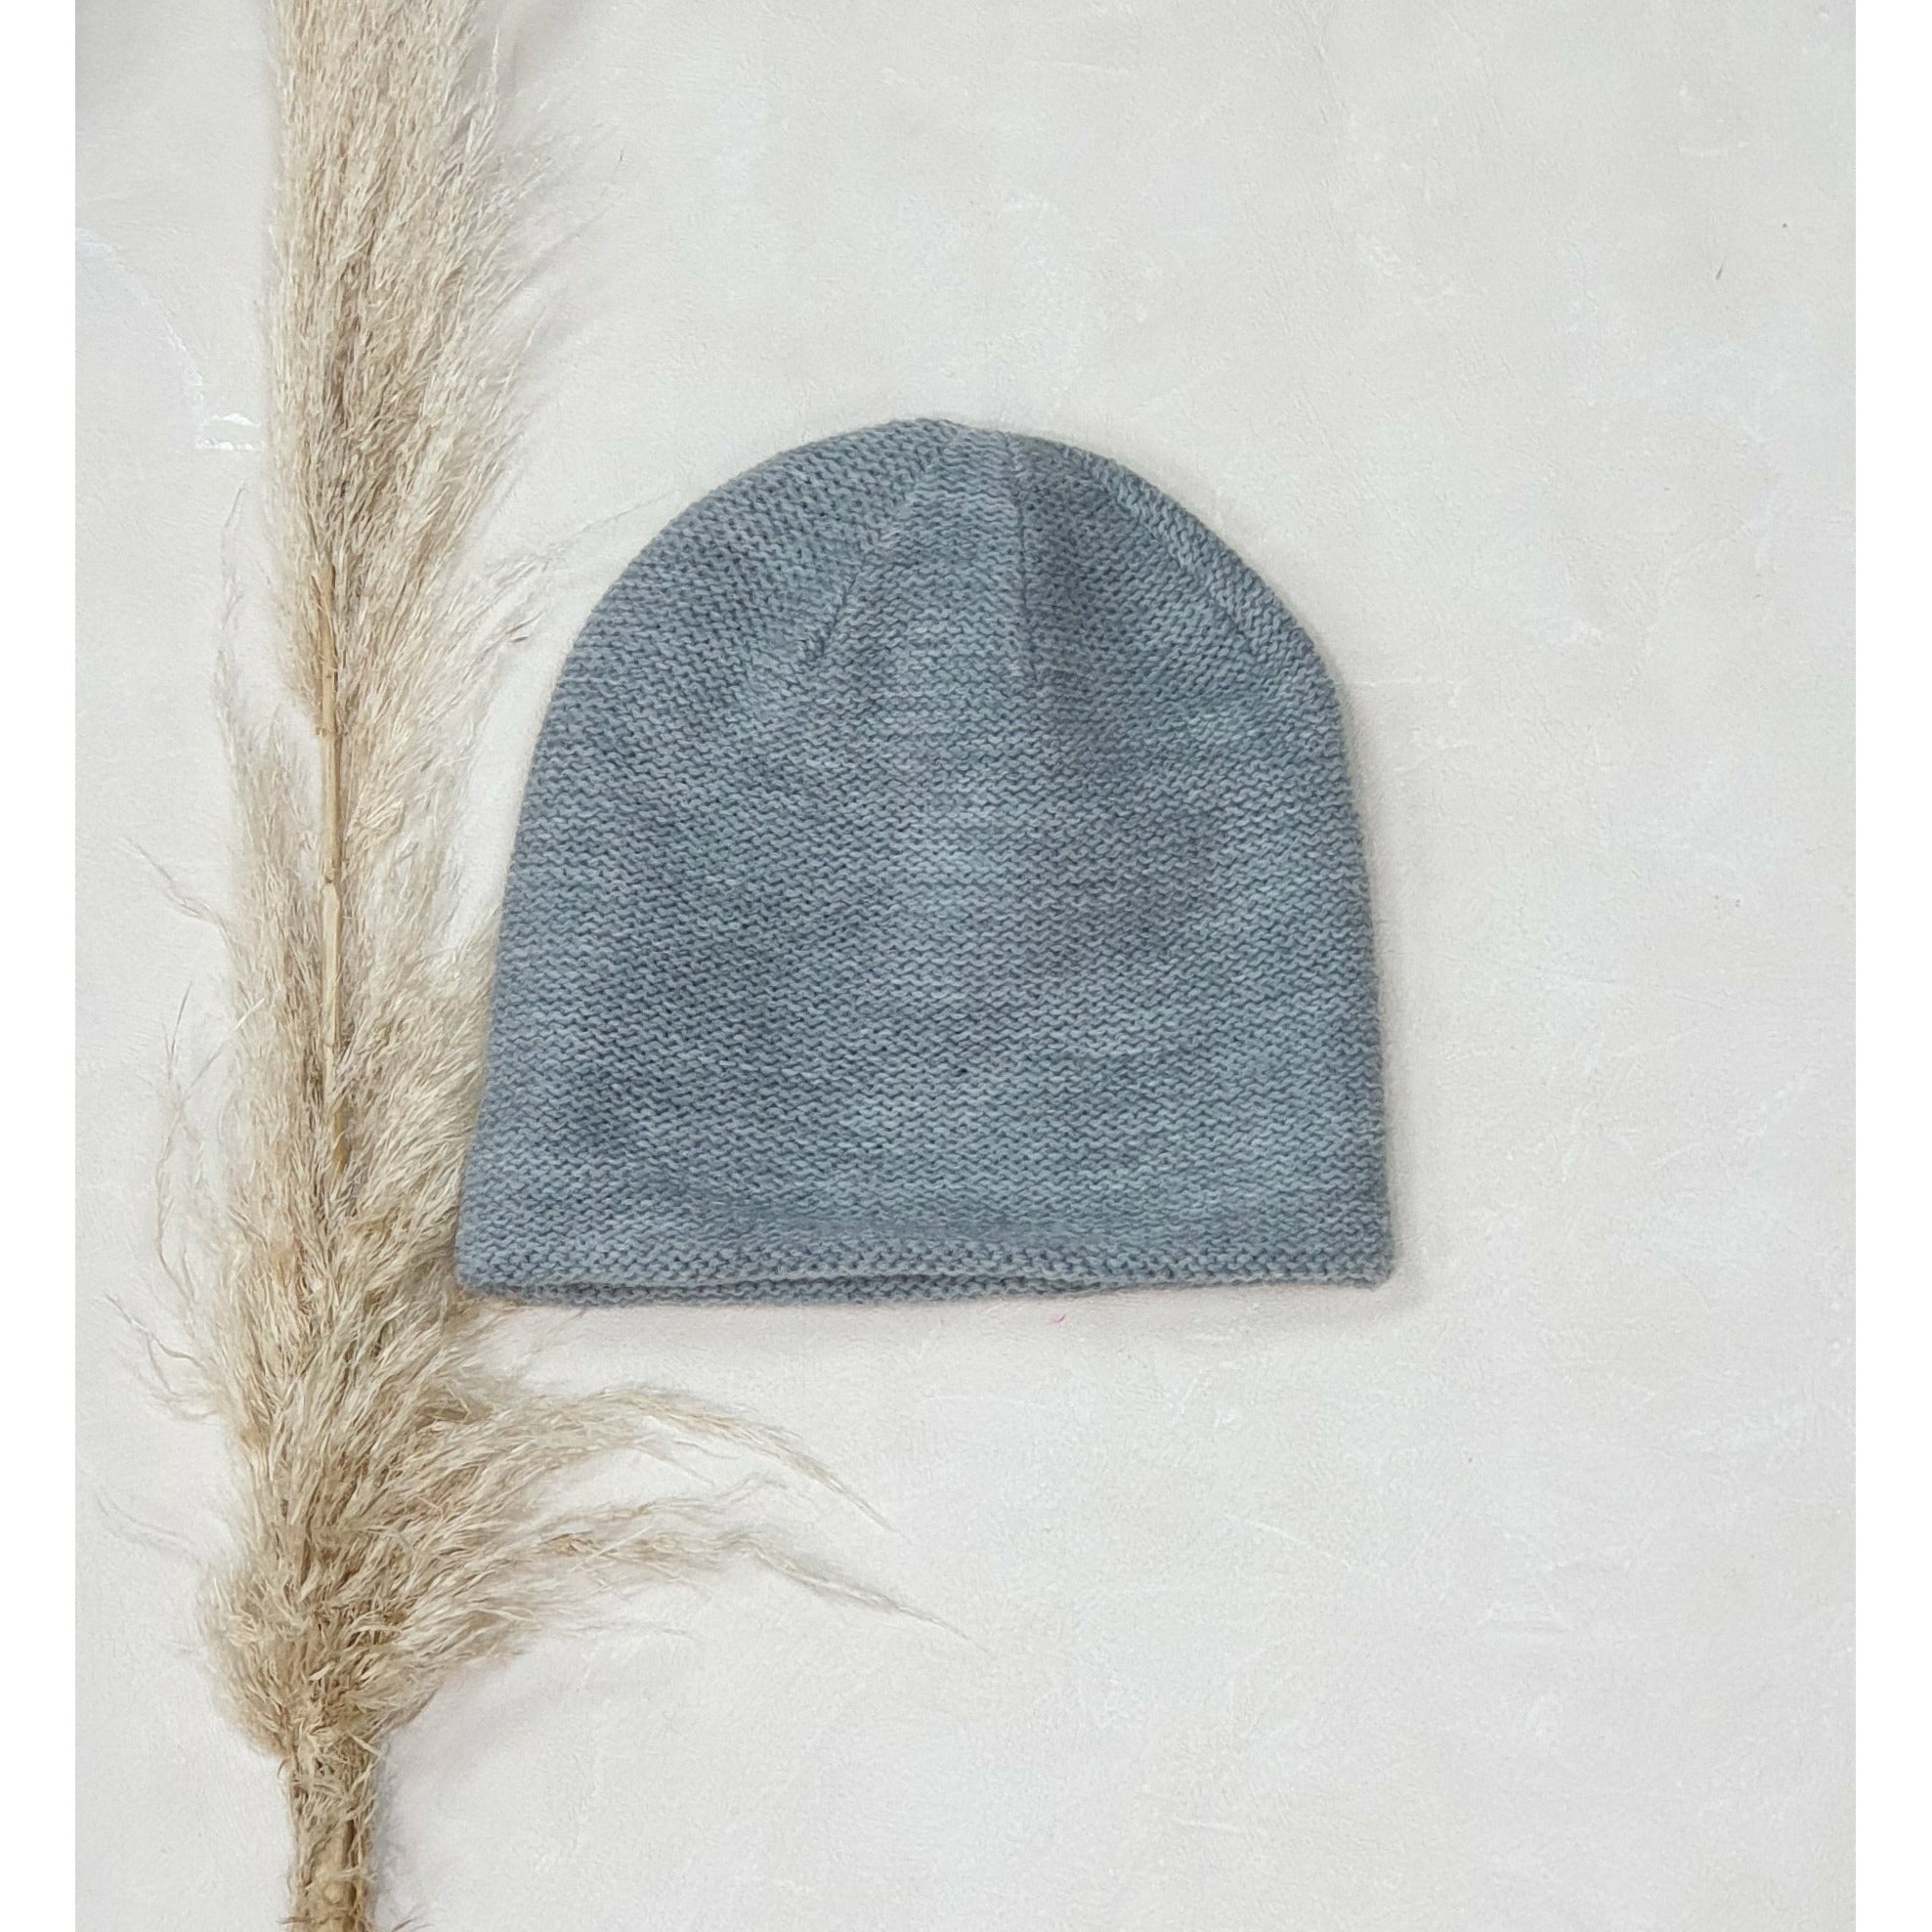 Slouch Beanie - Grey Not specified